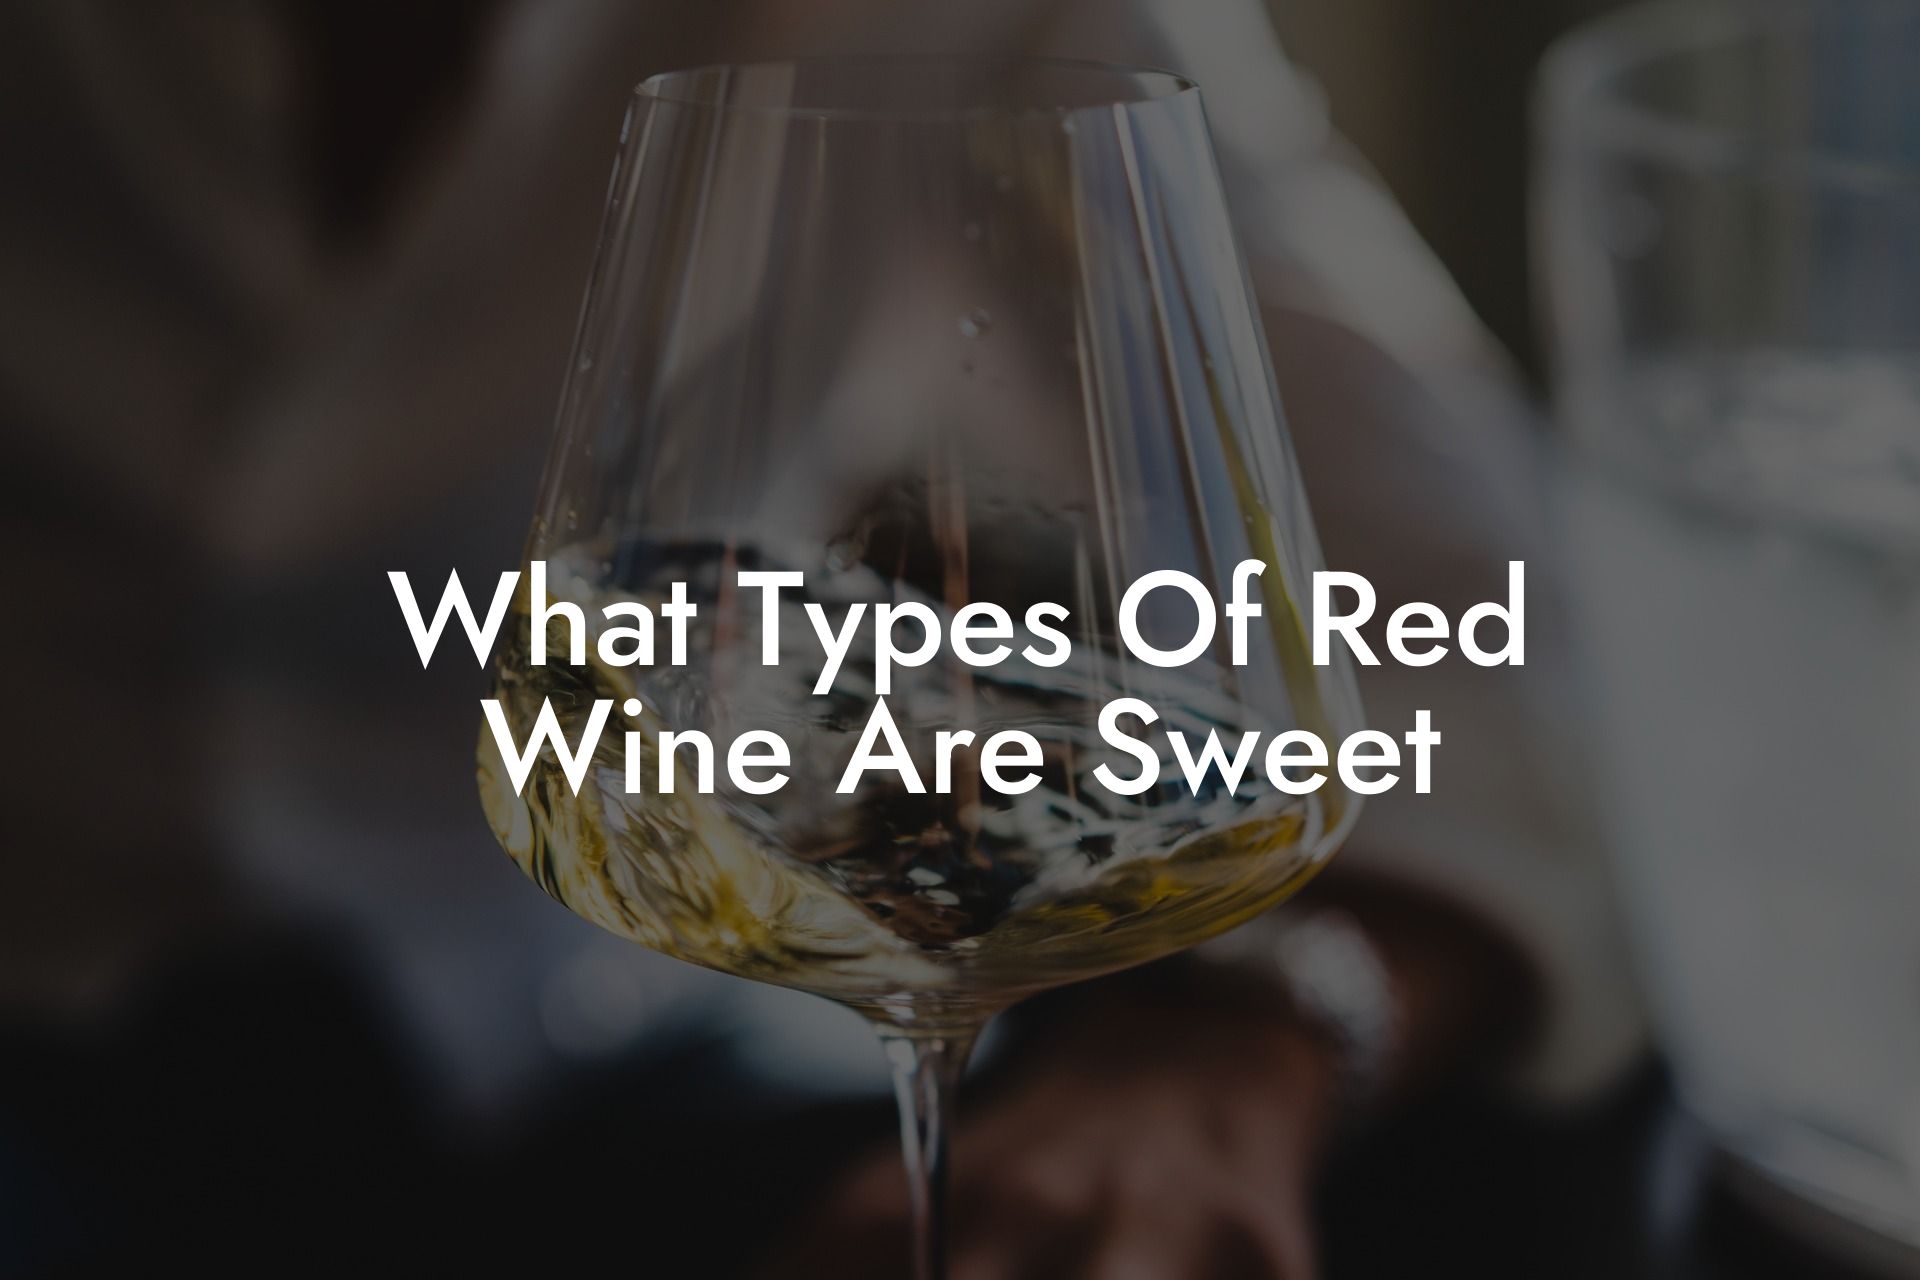 What Types Of Red Wine Are Sweet